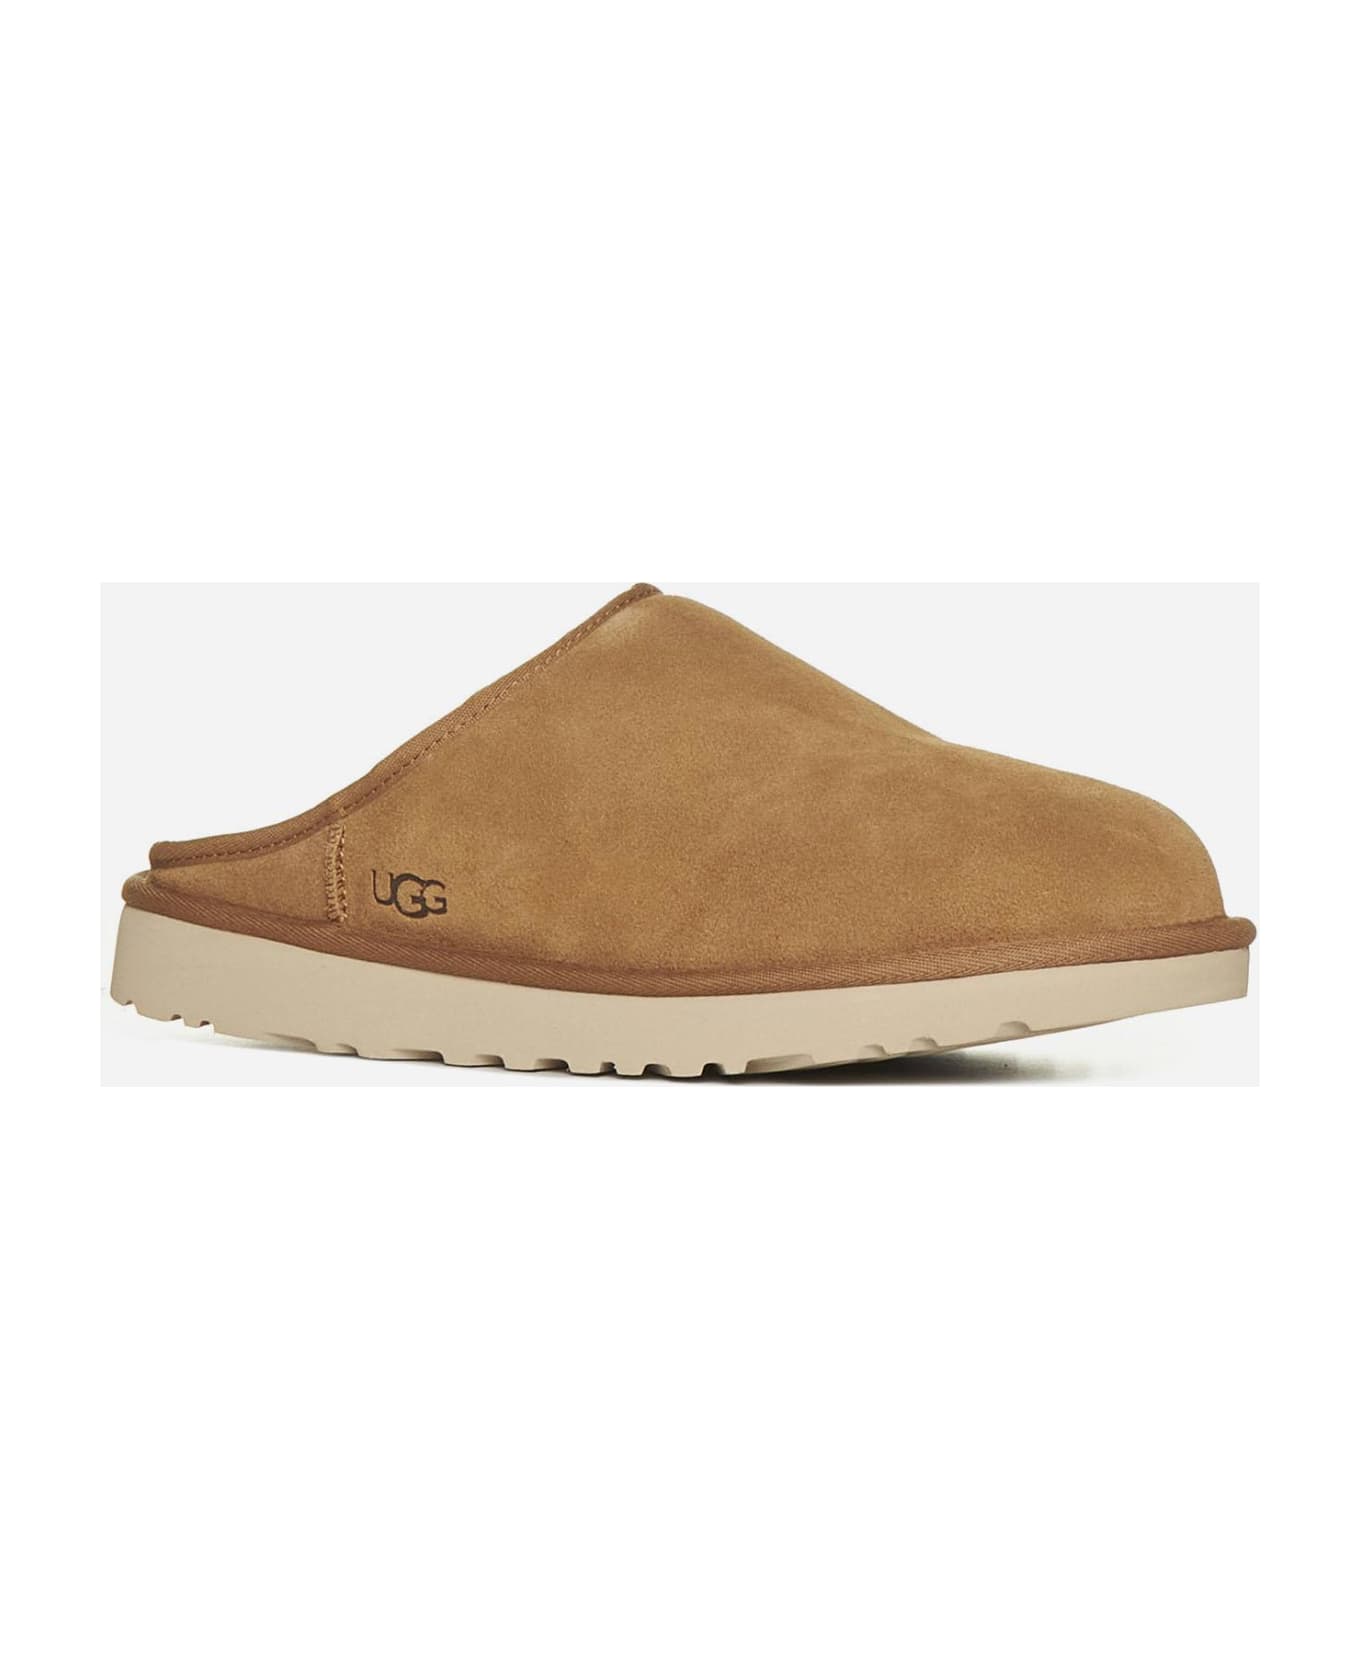 UGG Suede Slip-on Mules - Che Chestnut